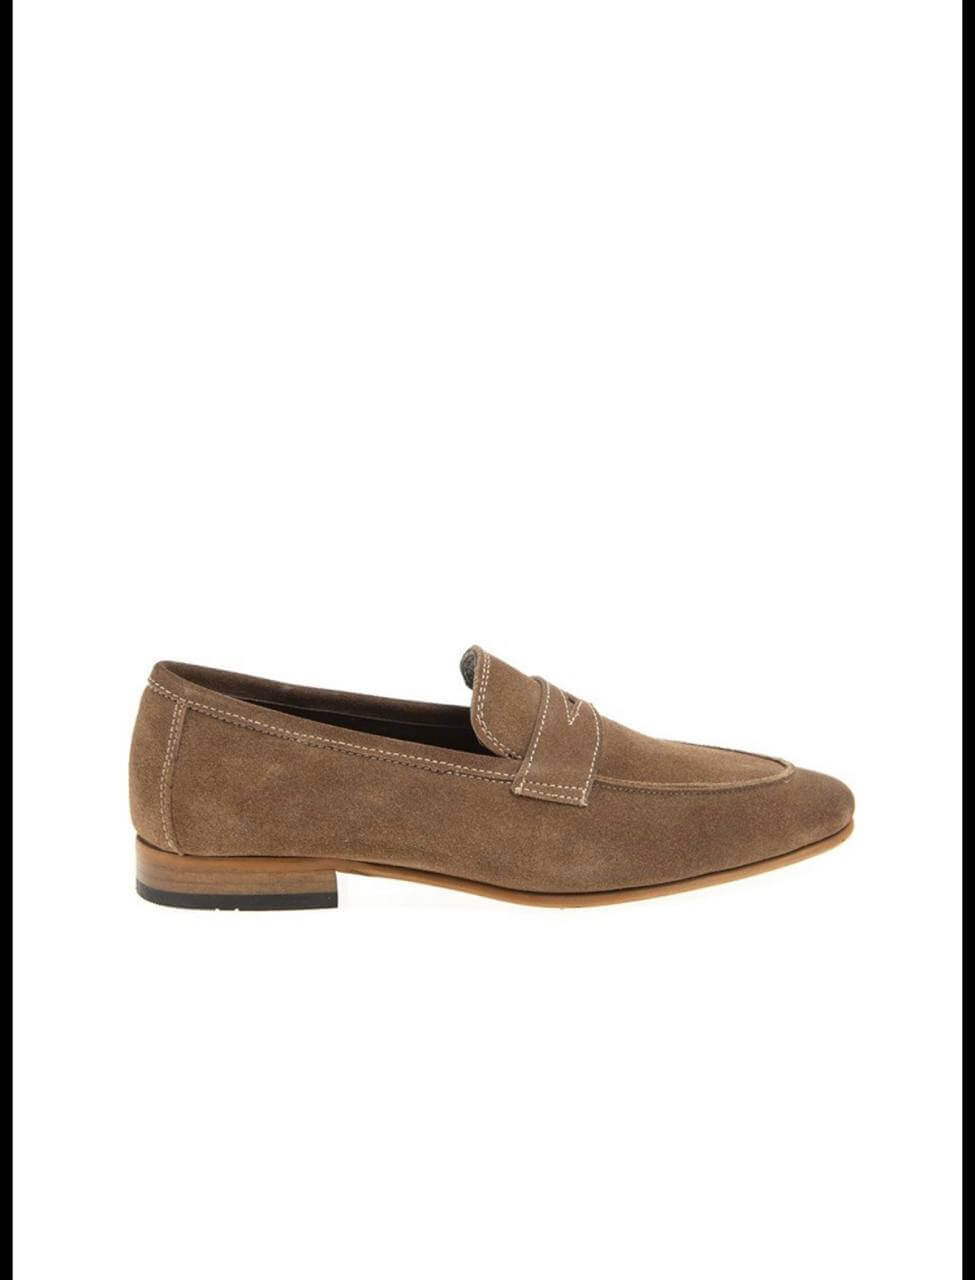 Suede Cappuccino Loafer